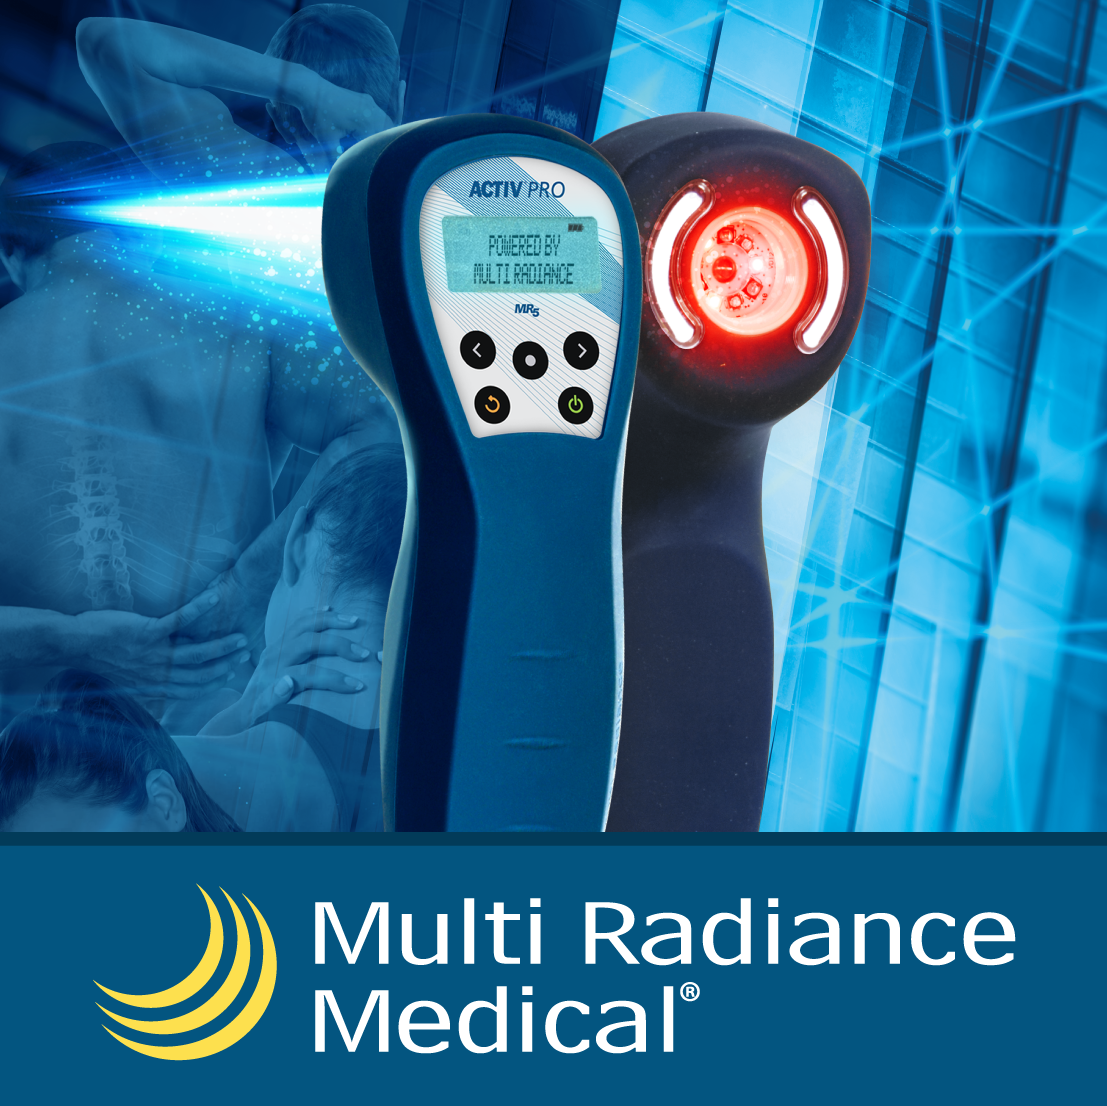 Multi Radiance Medical is a leading developer and manufacturer of FDA-cleared super pulsed laser therapy technology.